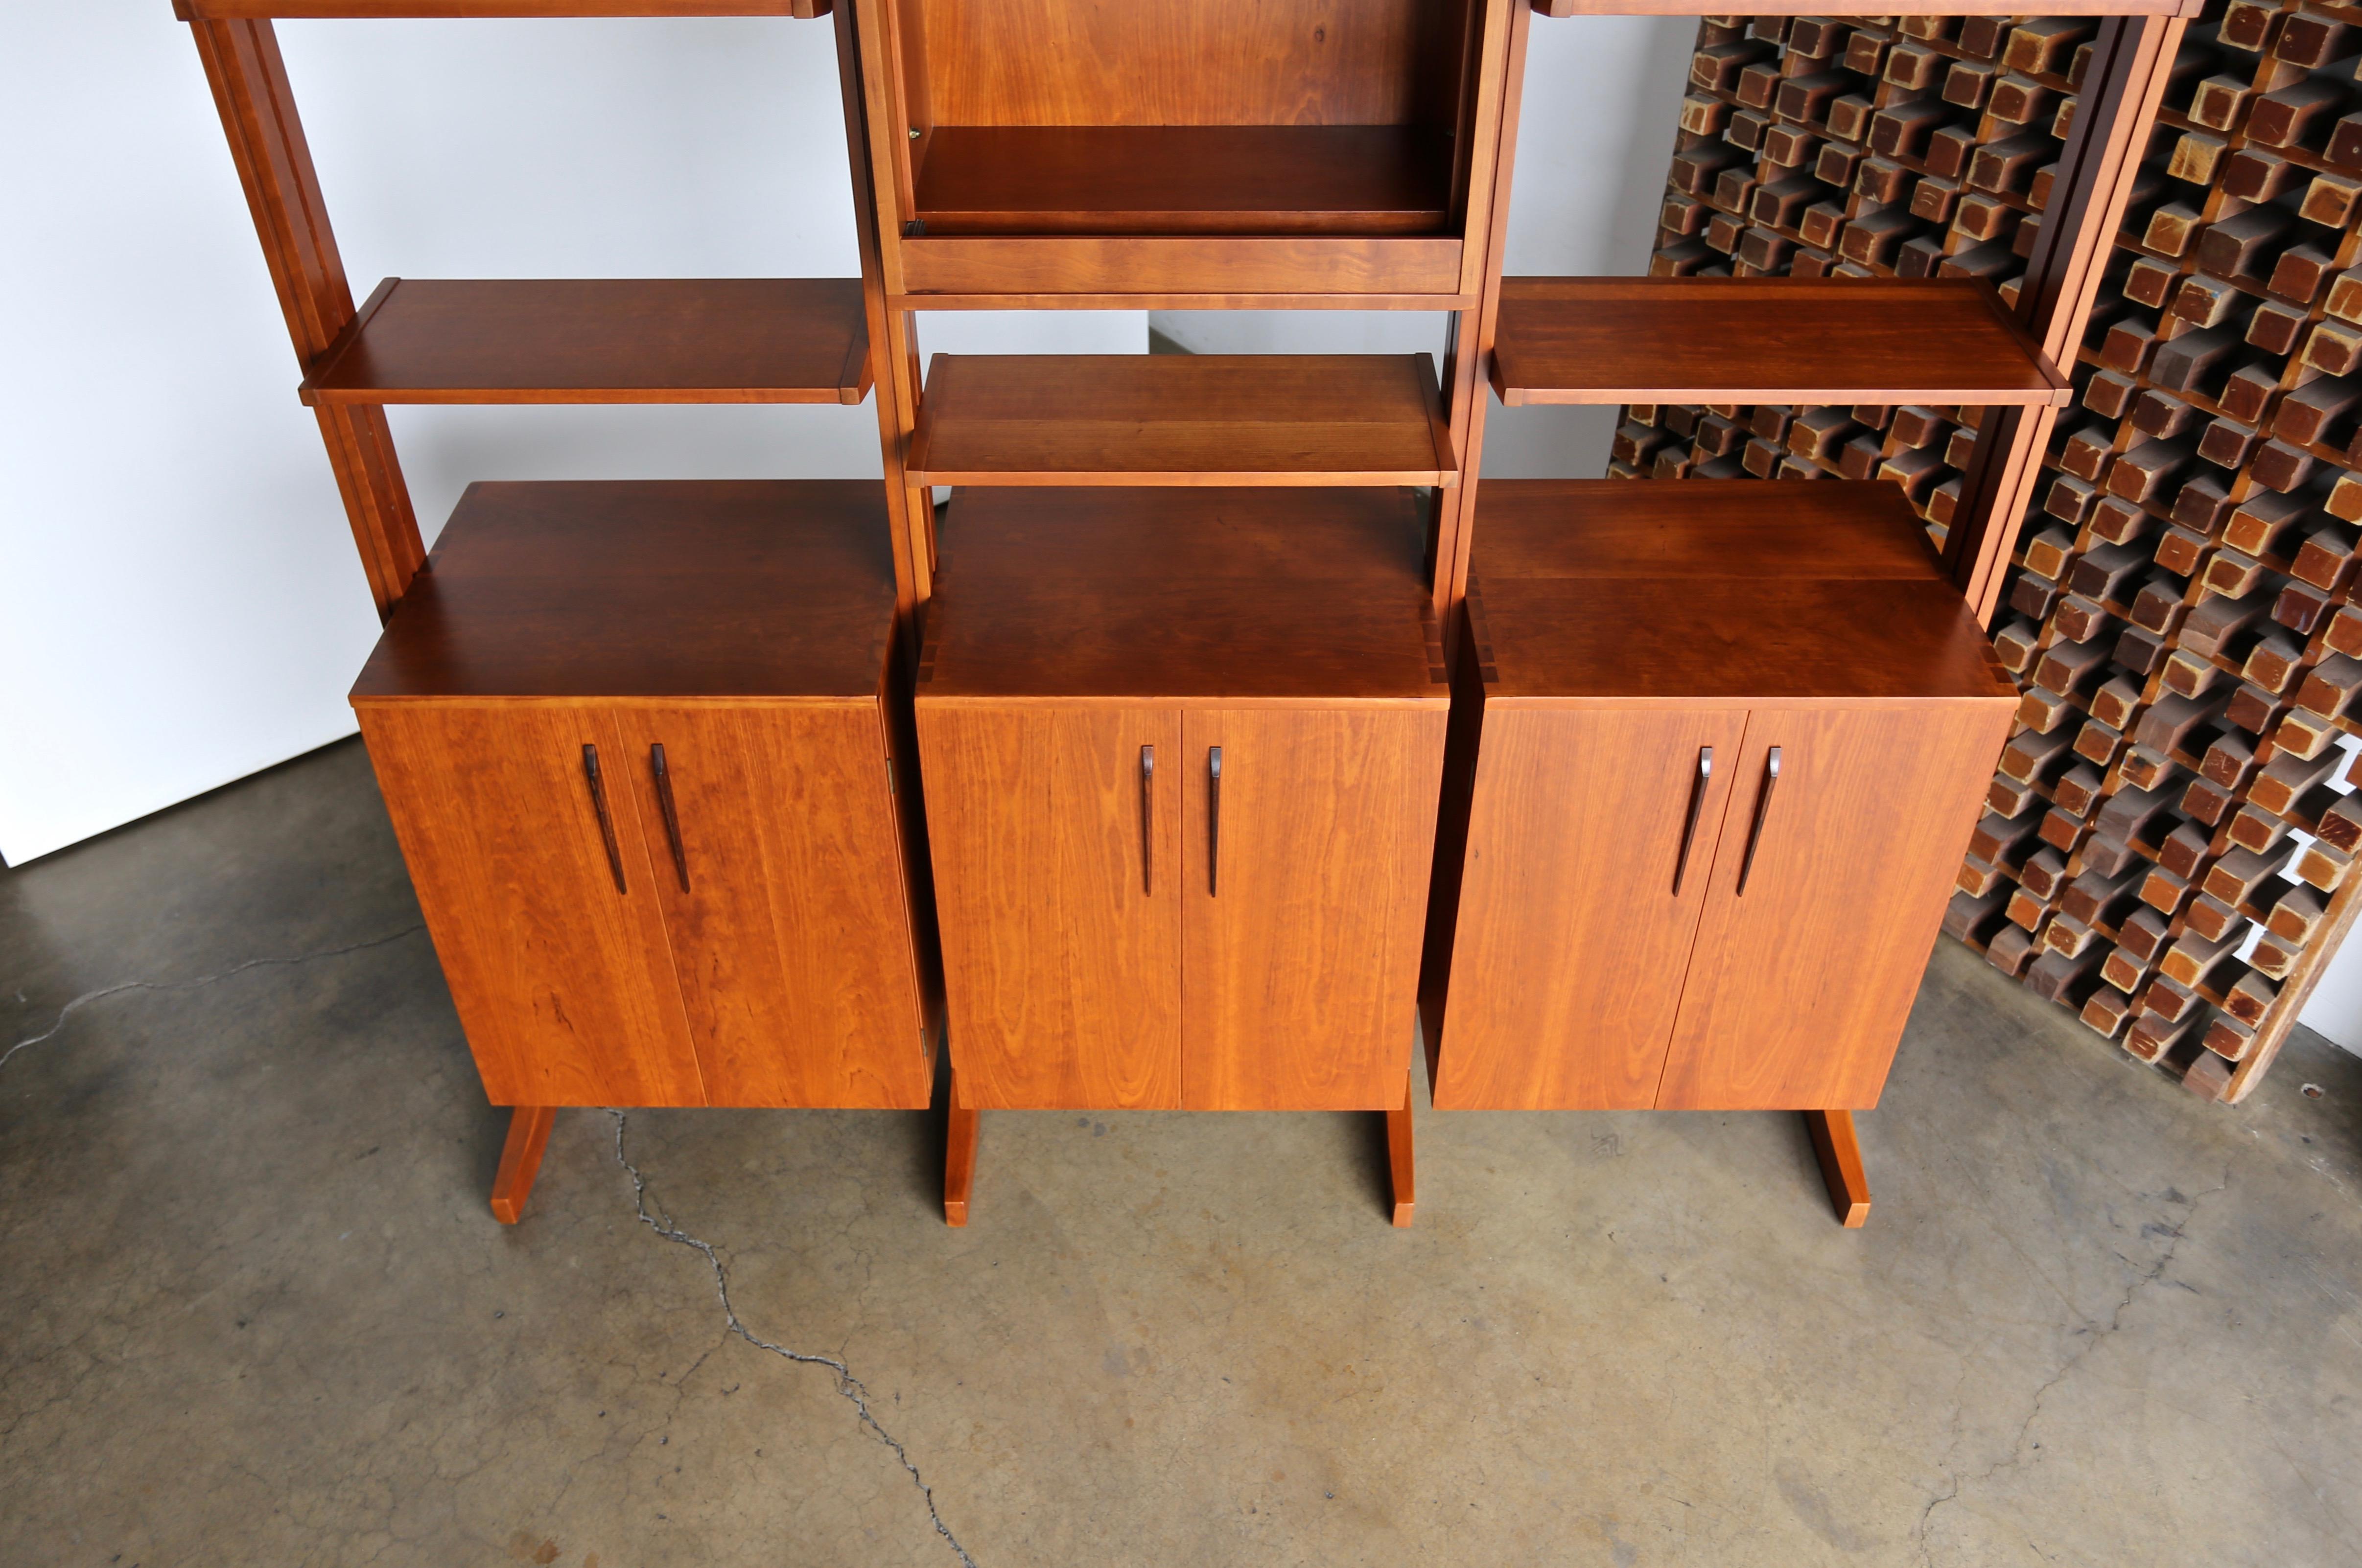 William Ketelle Handcrafted Freestanding Wall Unit, 1971 11